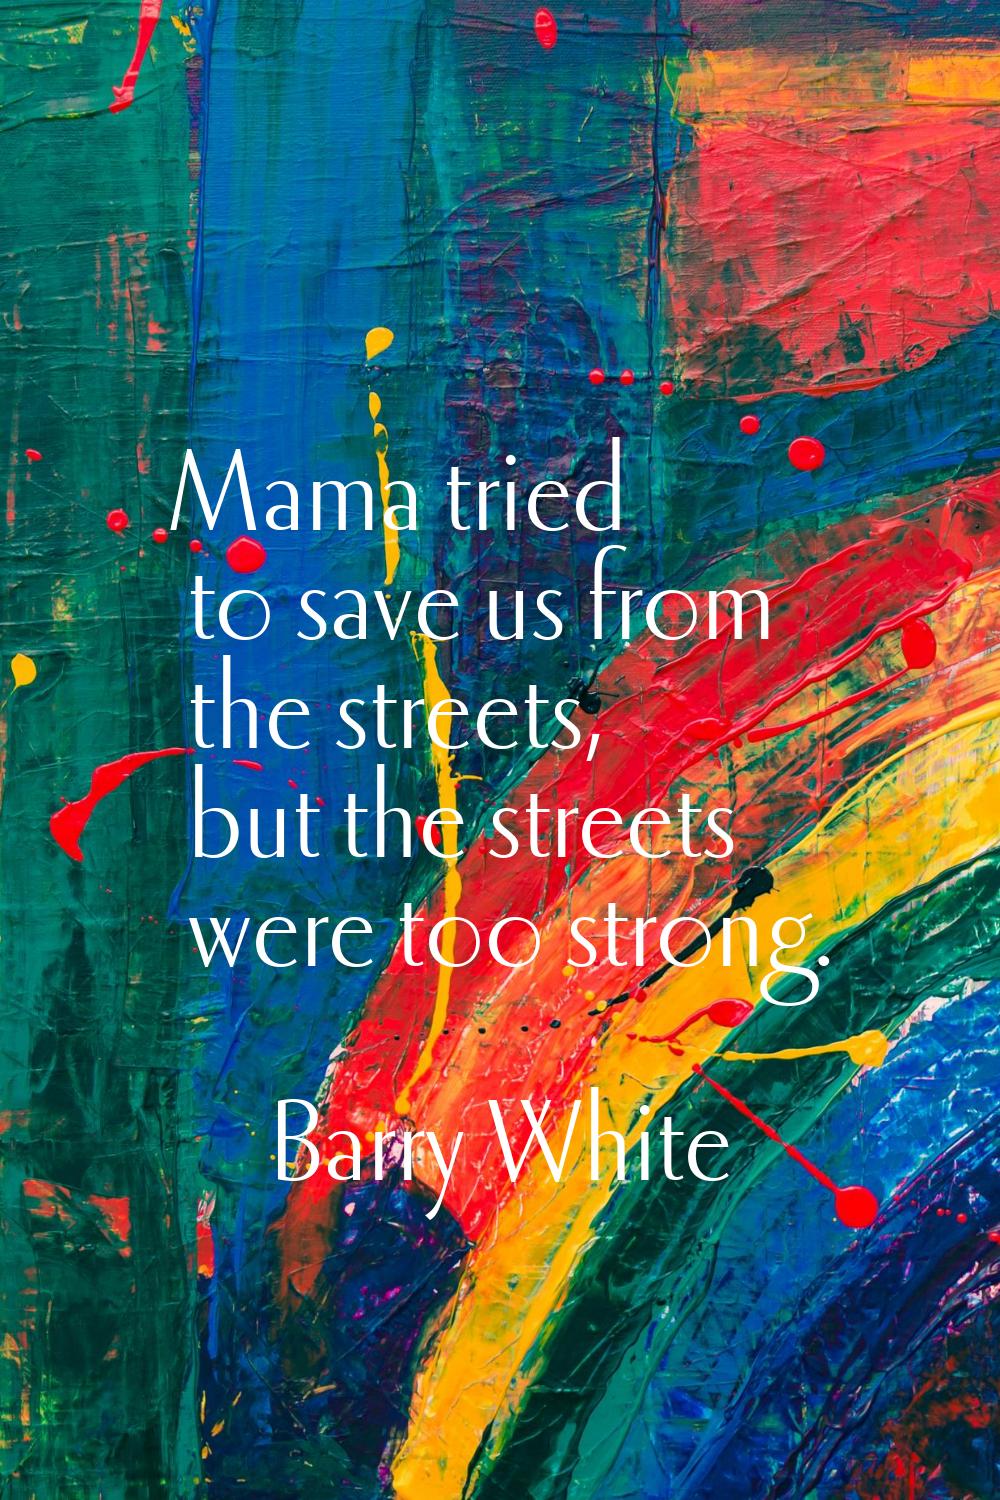 Mama tried to save us from the streets, but the streets were too strong.